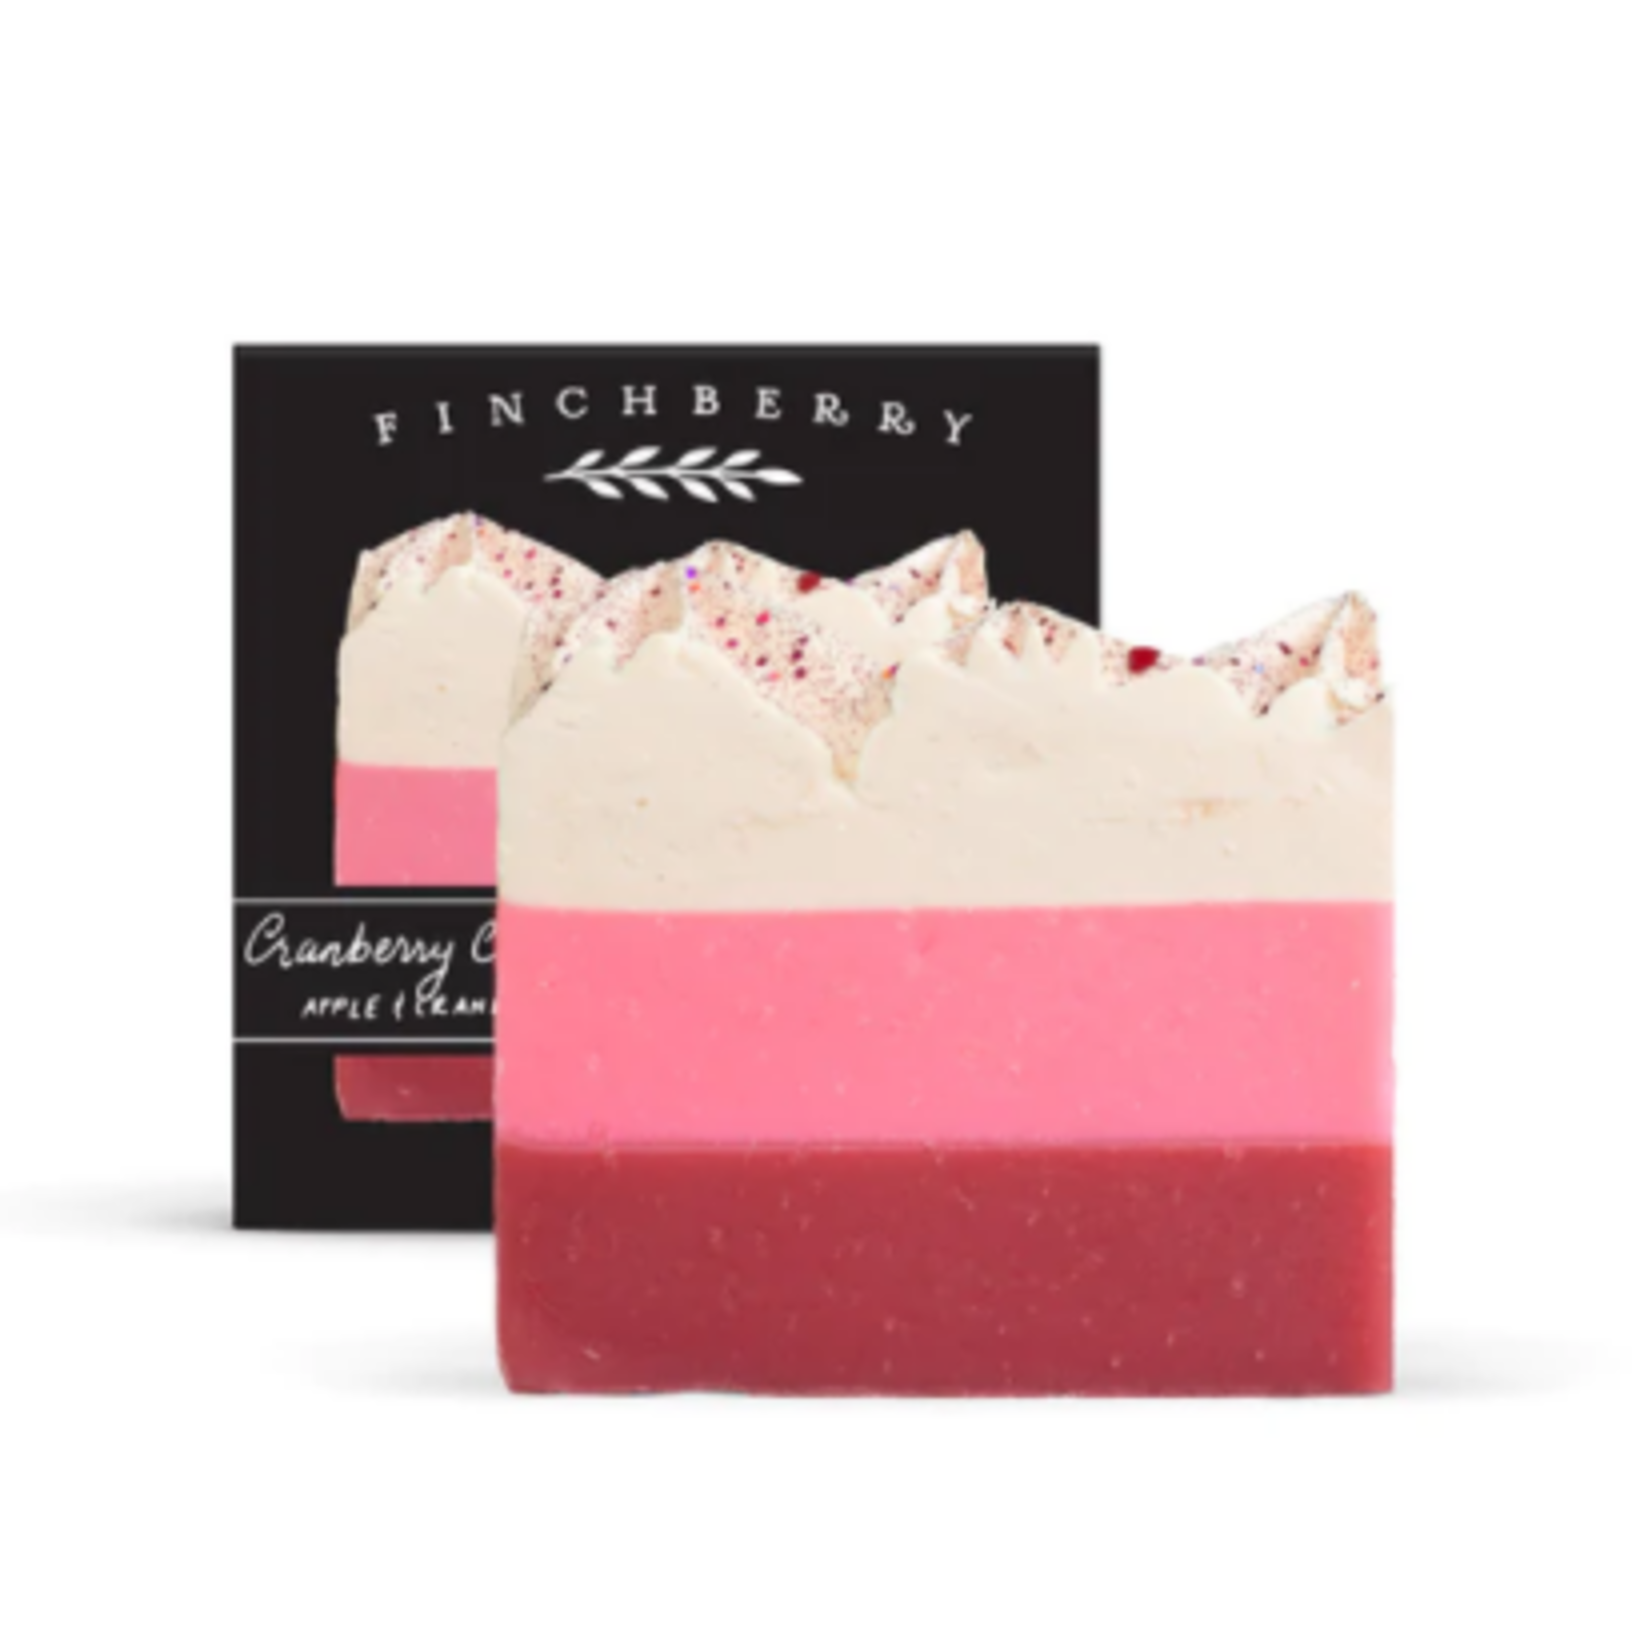 Finchberry Cranberry Chutney Soap Boxed